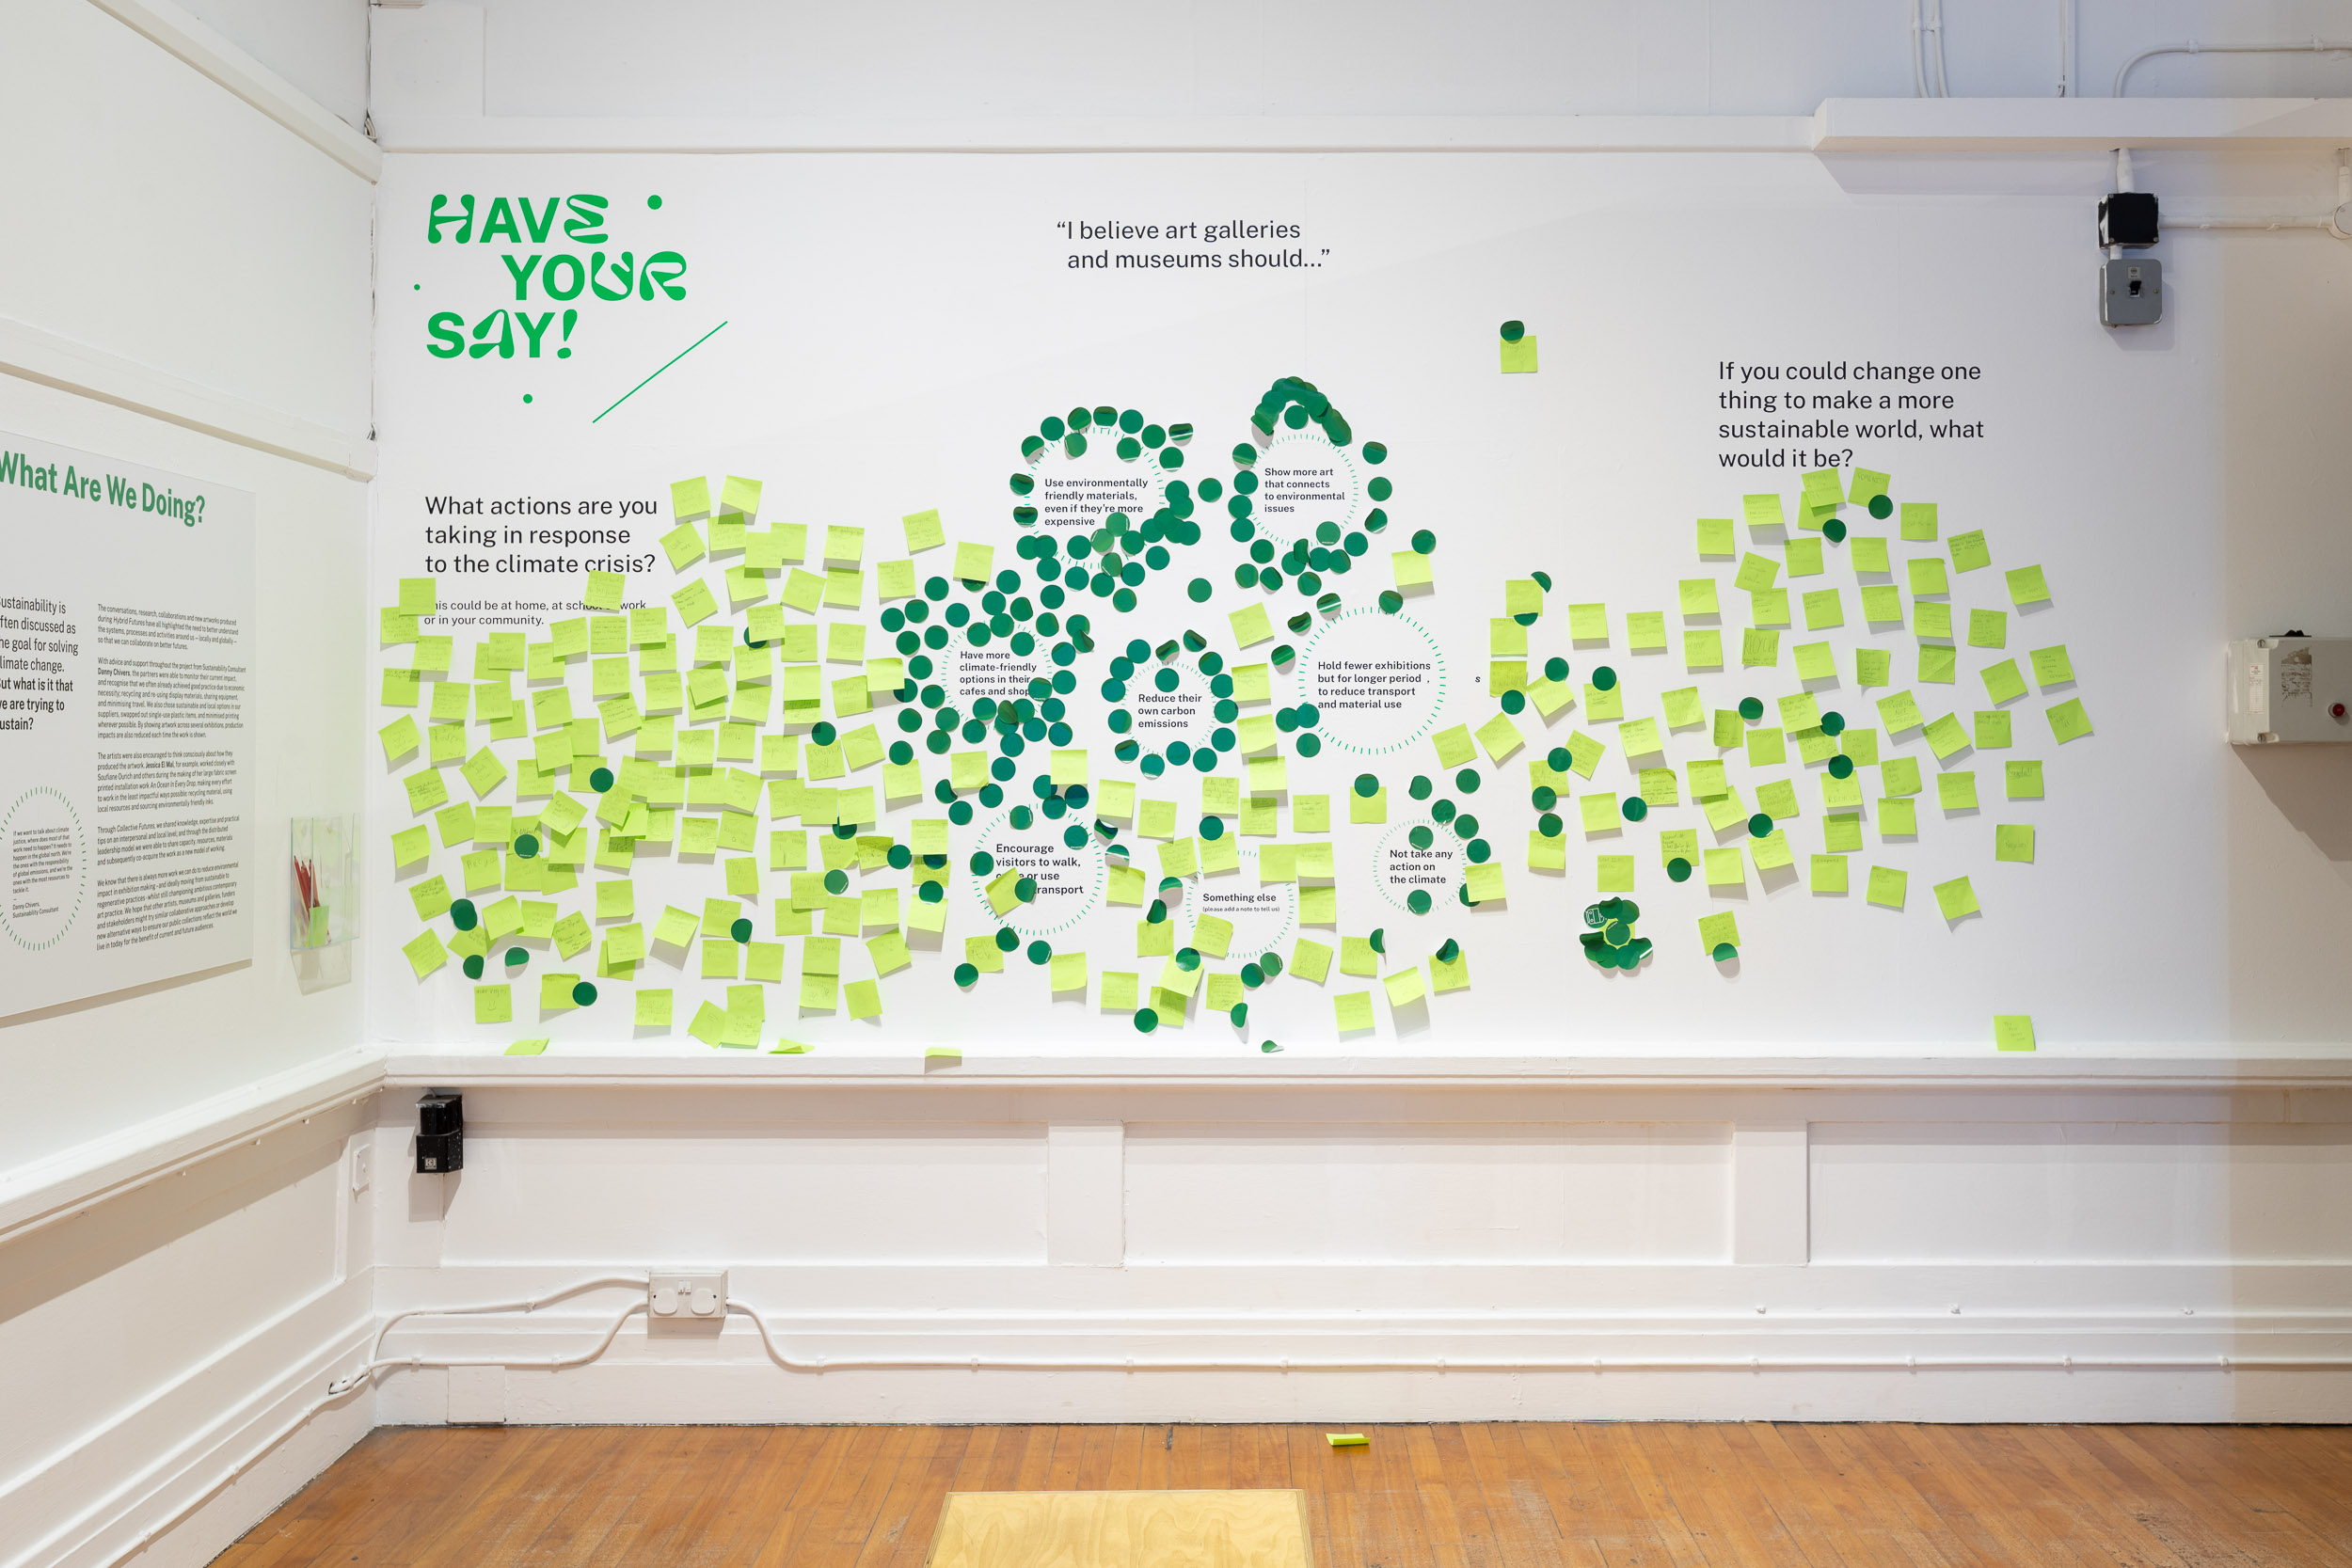 Installation view of Hybrid Futures at Salford Museum & Art gallery, showing the main 'Have Your Say' question wall, and audience responses.